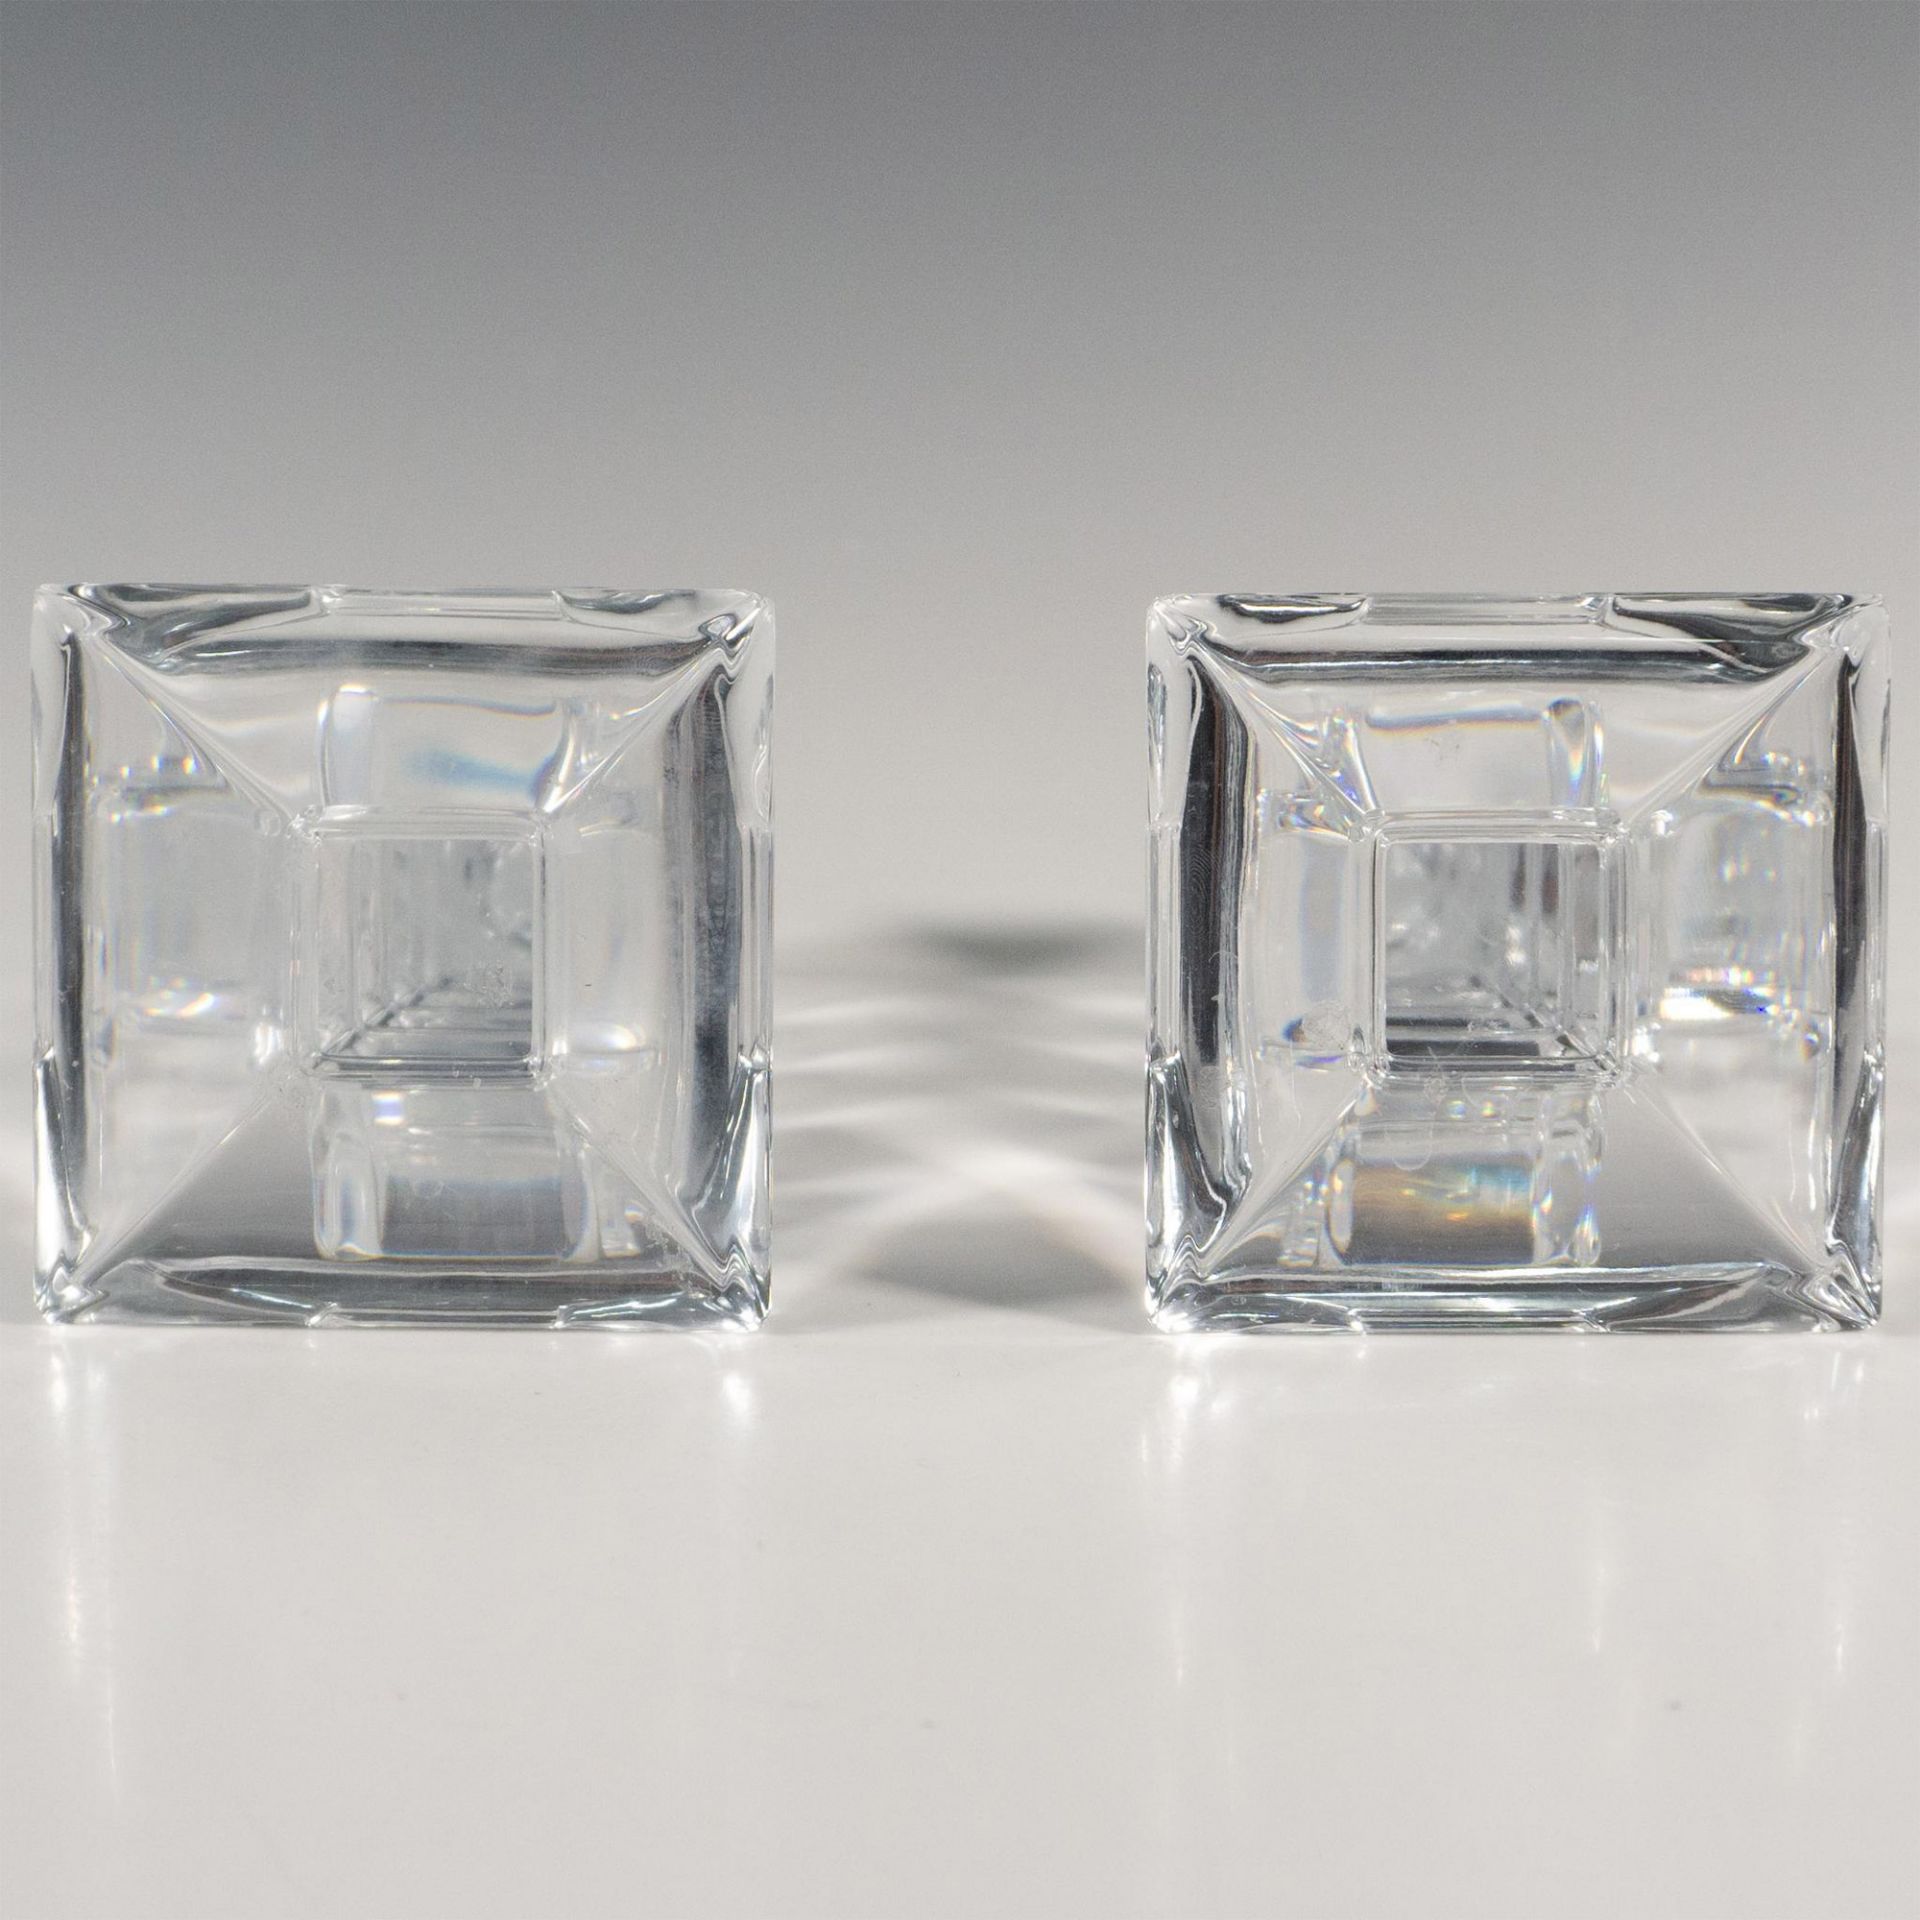 Pair of Marquis by Waterford Crystal Candle Holders, Torino - Image 3 of 3